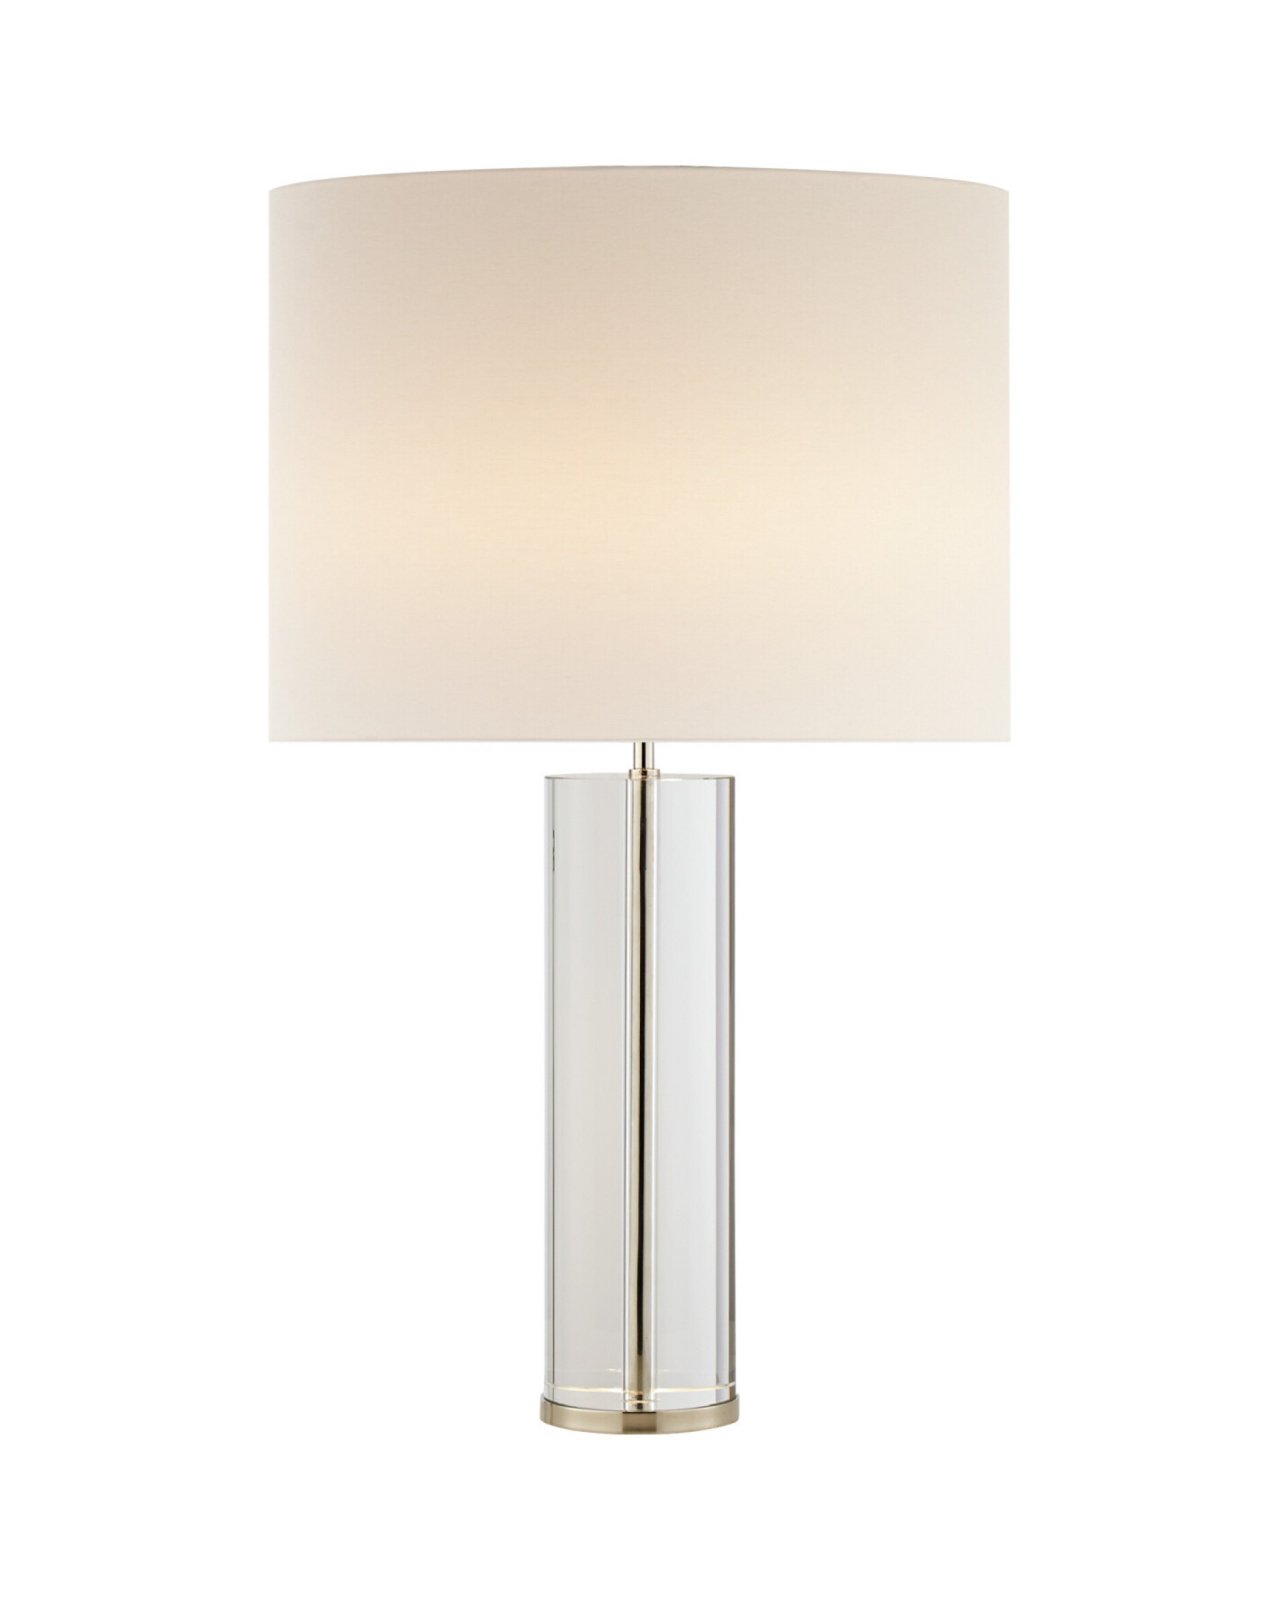 Lineham Table Lamp Crystal and Polished Nickel